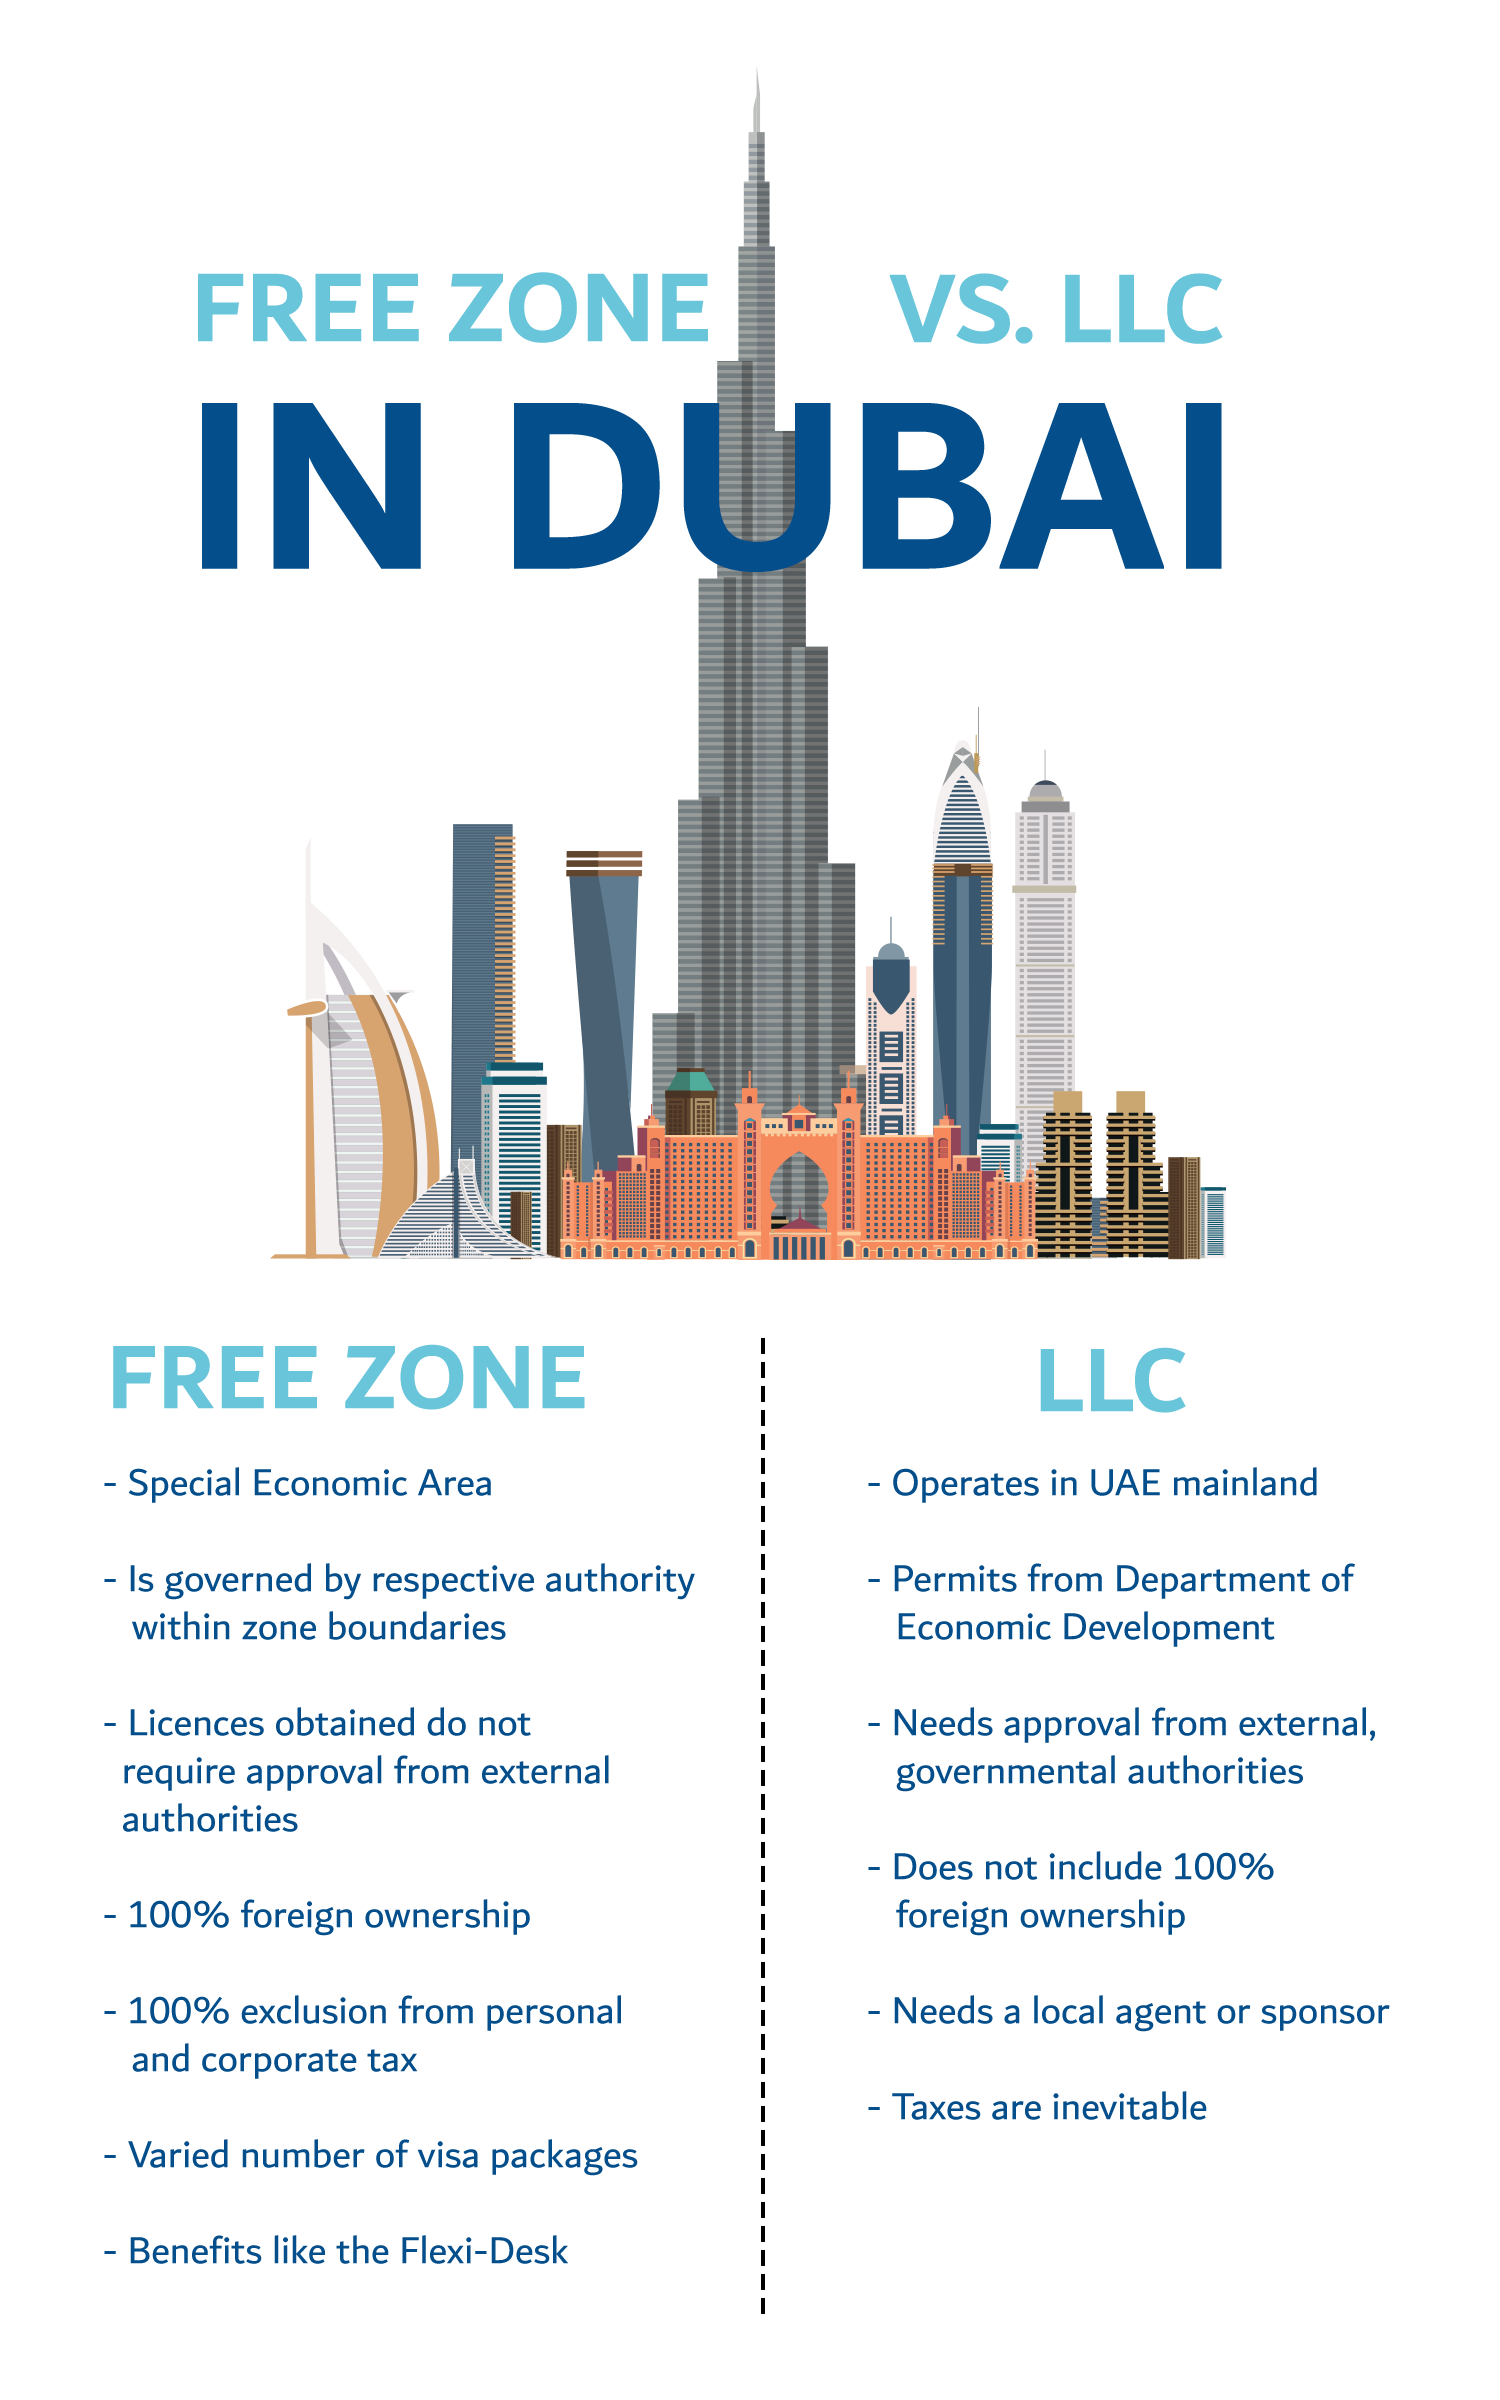 What is the Difference Between a Free Zone and an LLC in Dubai?